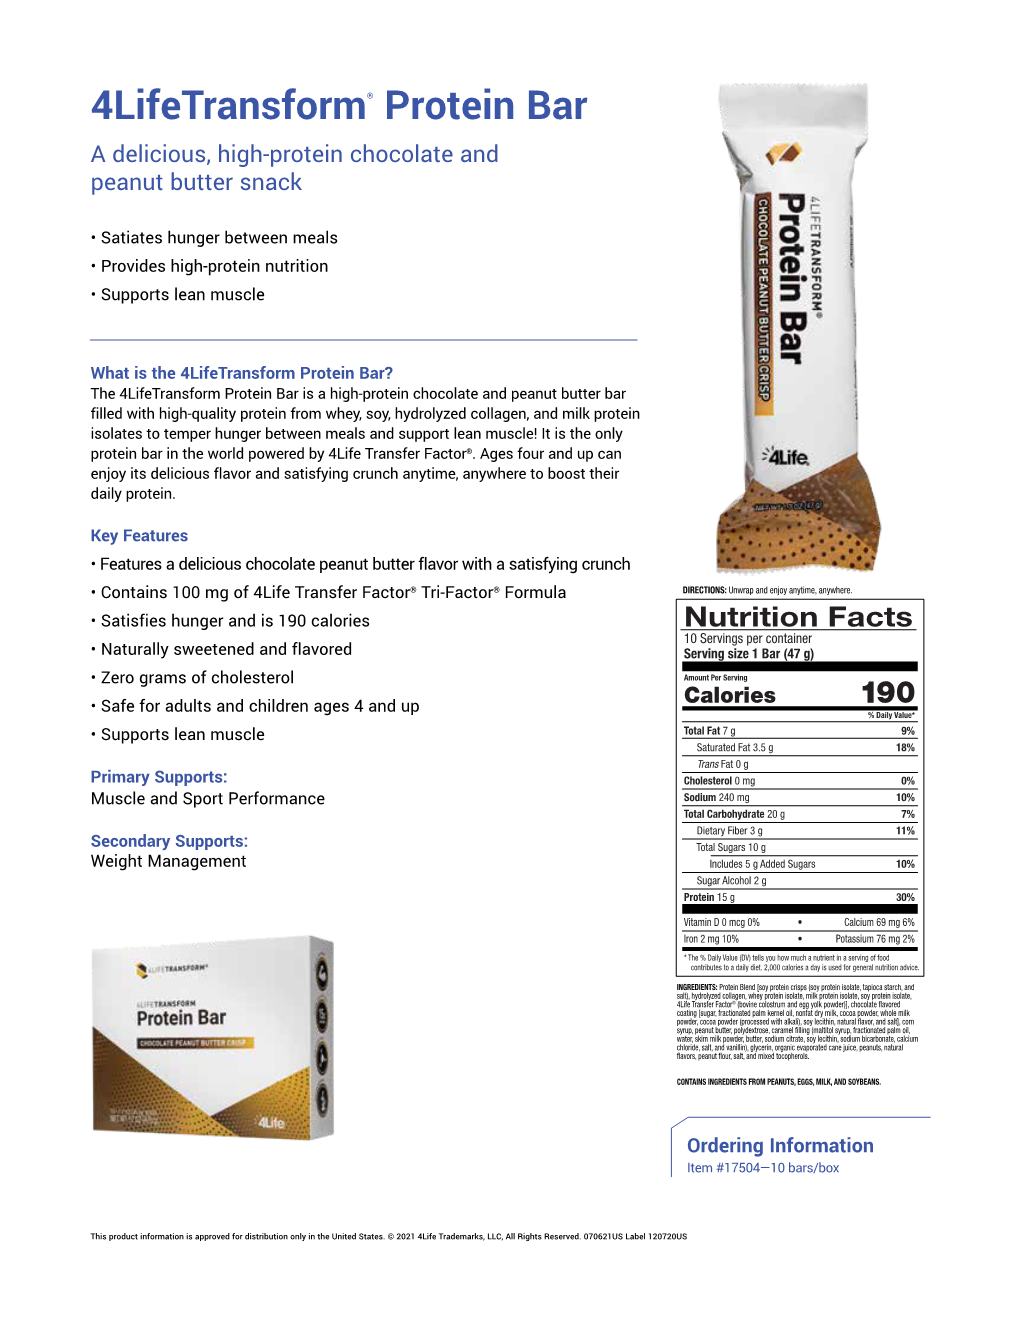 4Lifetransform® Protein Bar a Delicious, High-Protein Chocolate and Peanut Butter Snack